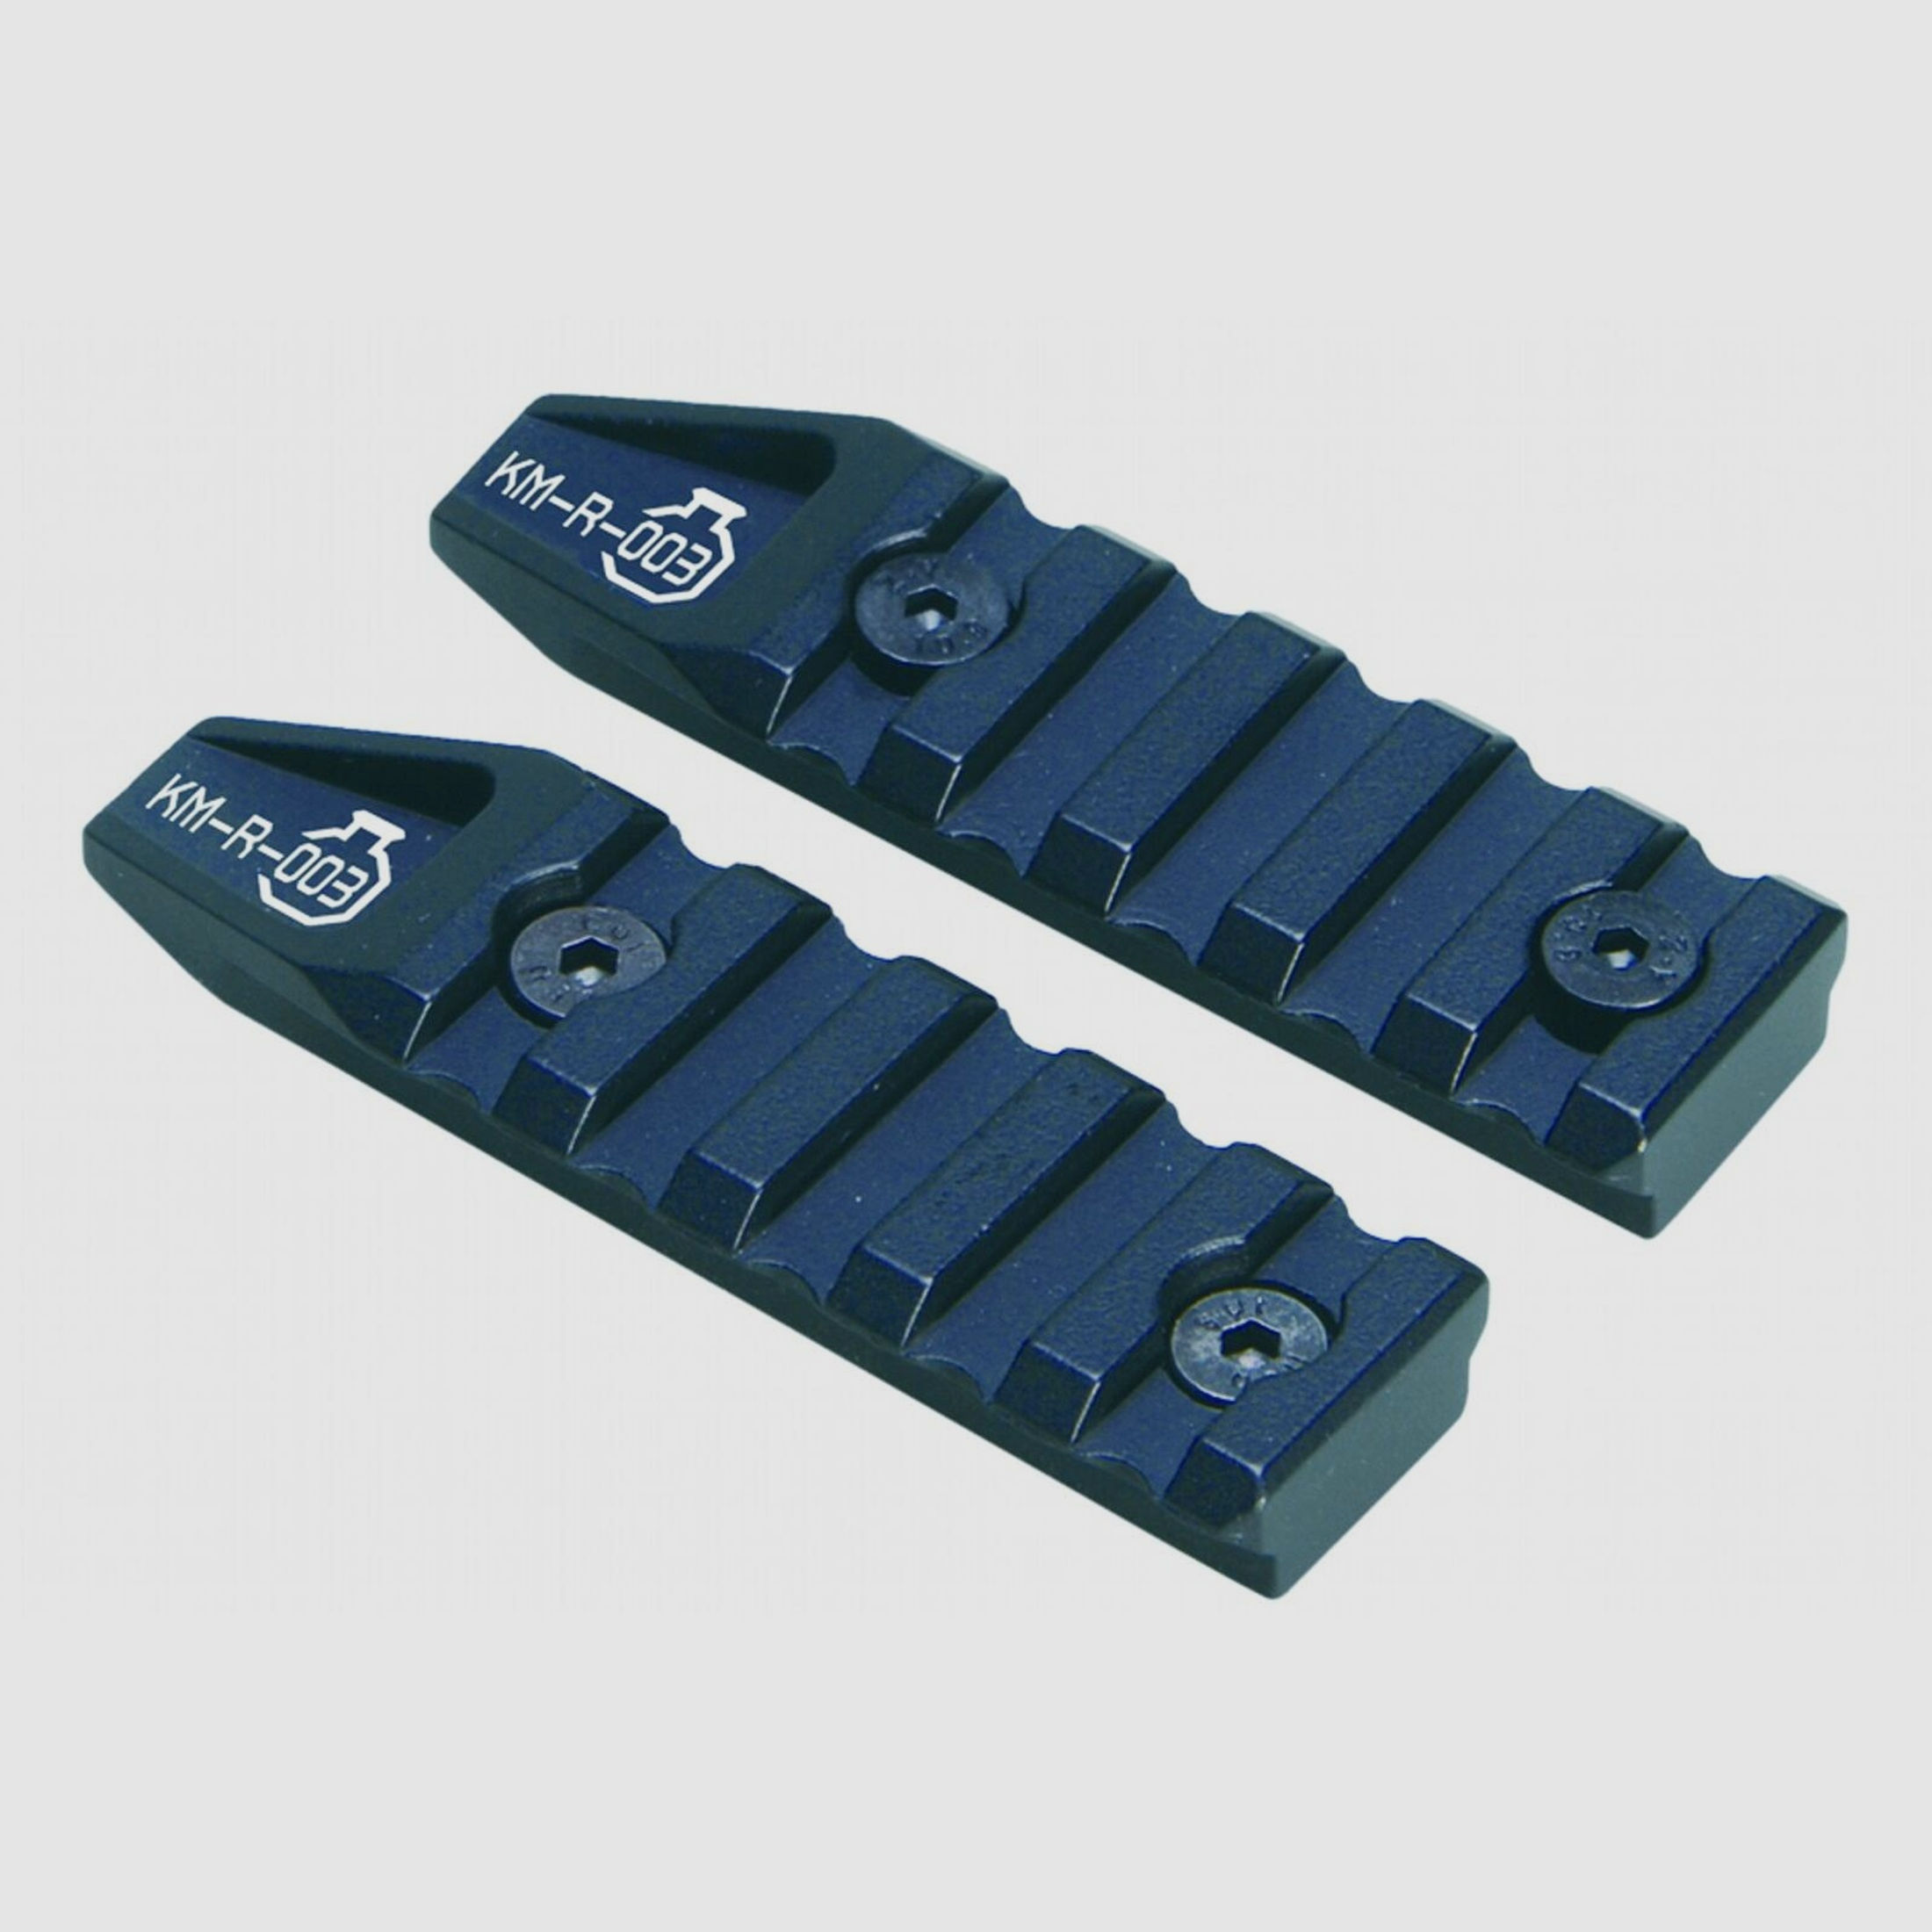 ARES Octa²rms 3' Key Rail System 2er Pack